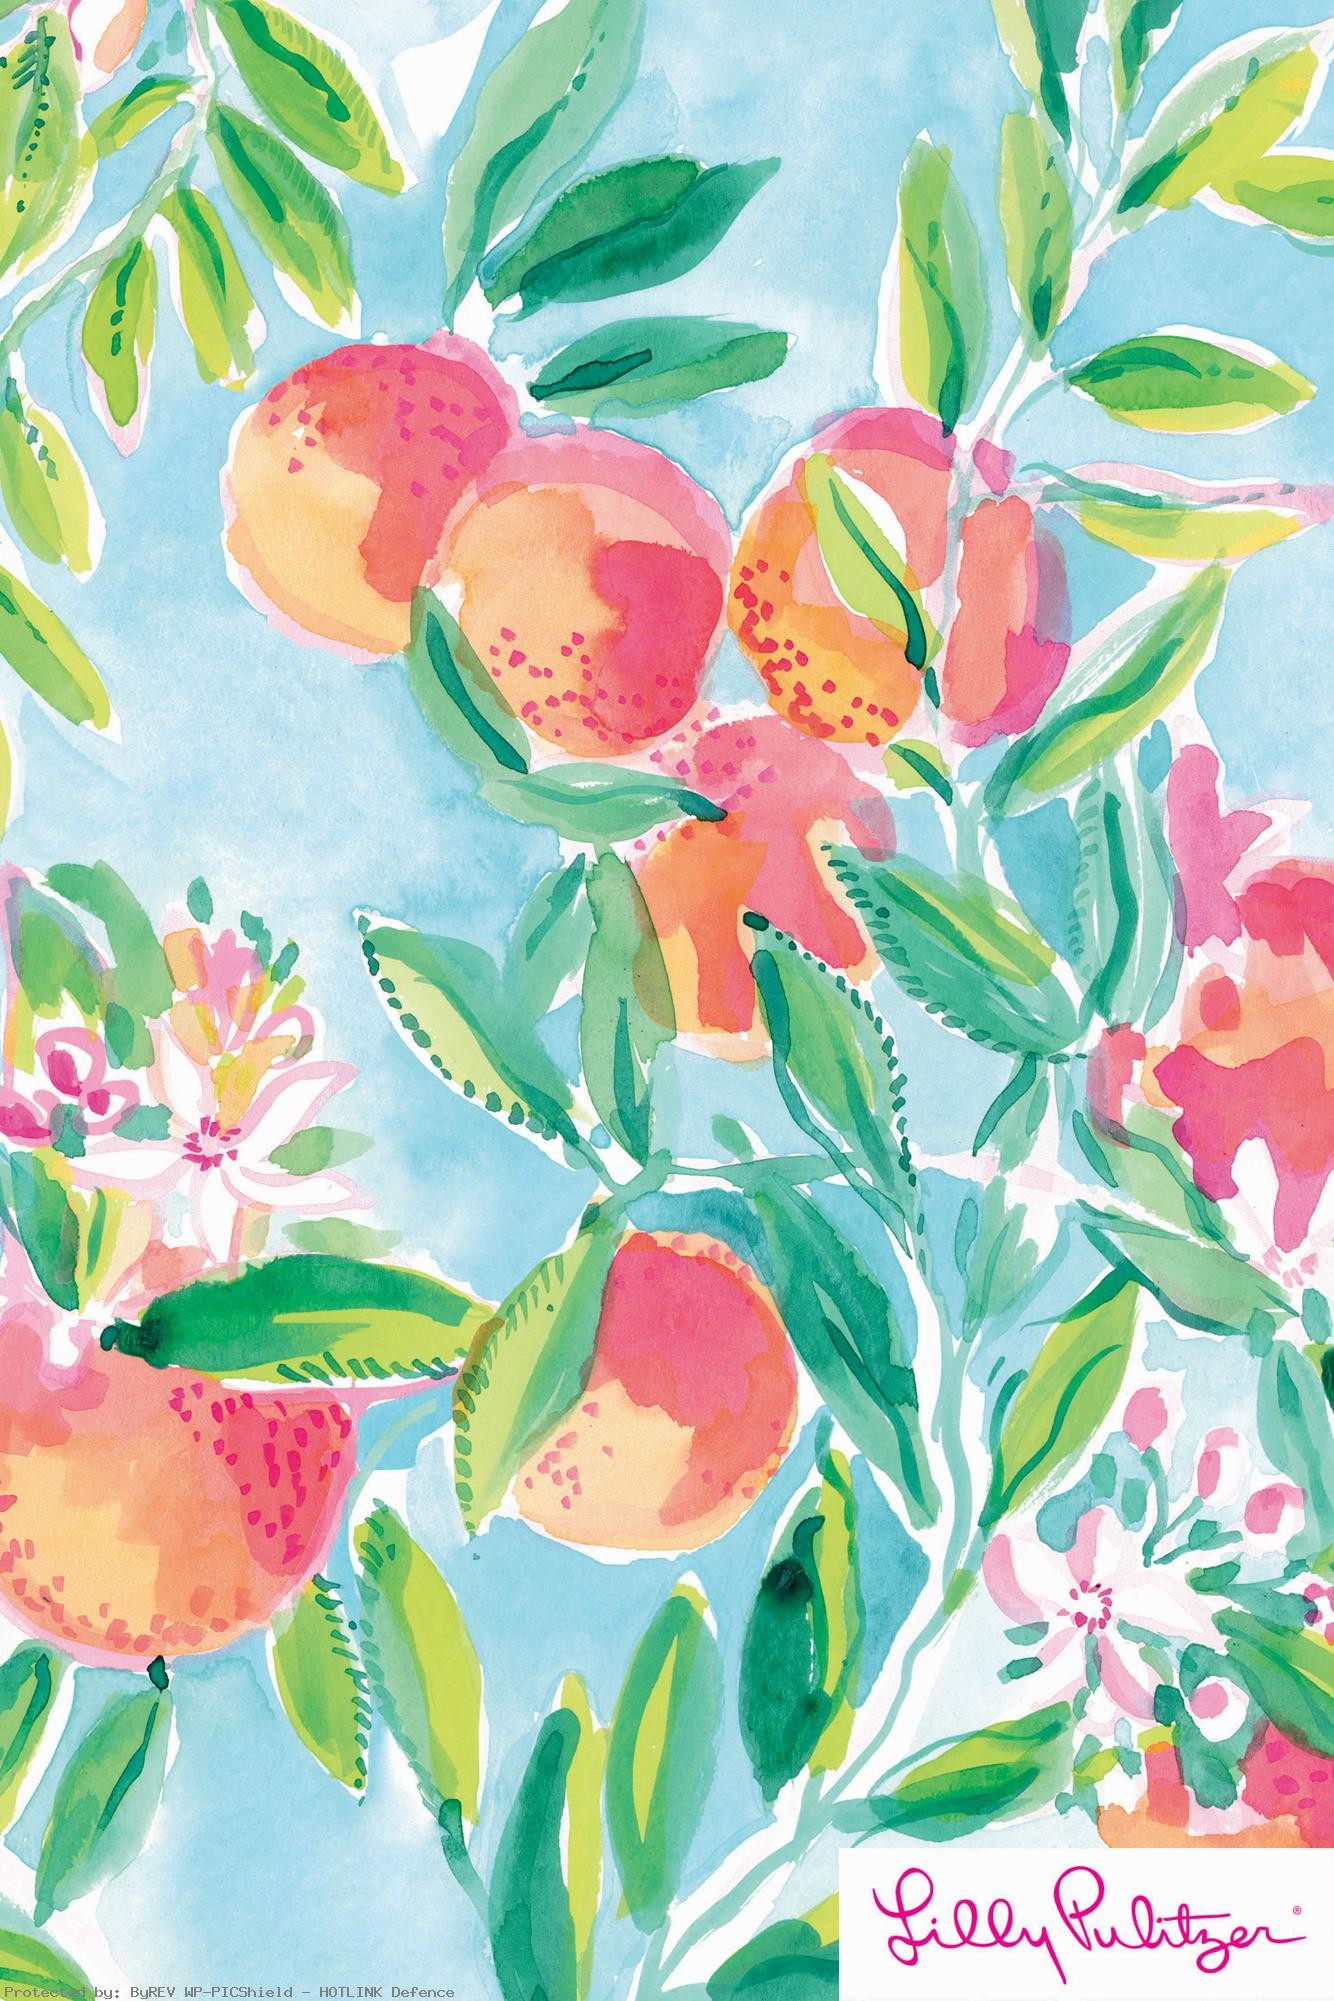 1334x2001 Fresh-Squeezed-Lilly-Pulitzer-x-Starbucks-wallpaper-wp4204308